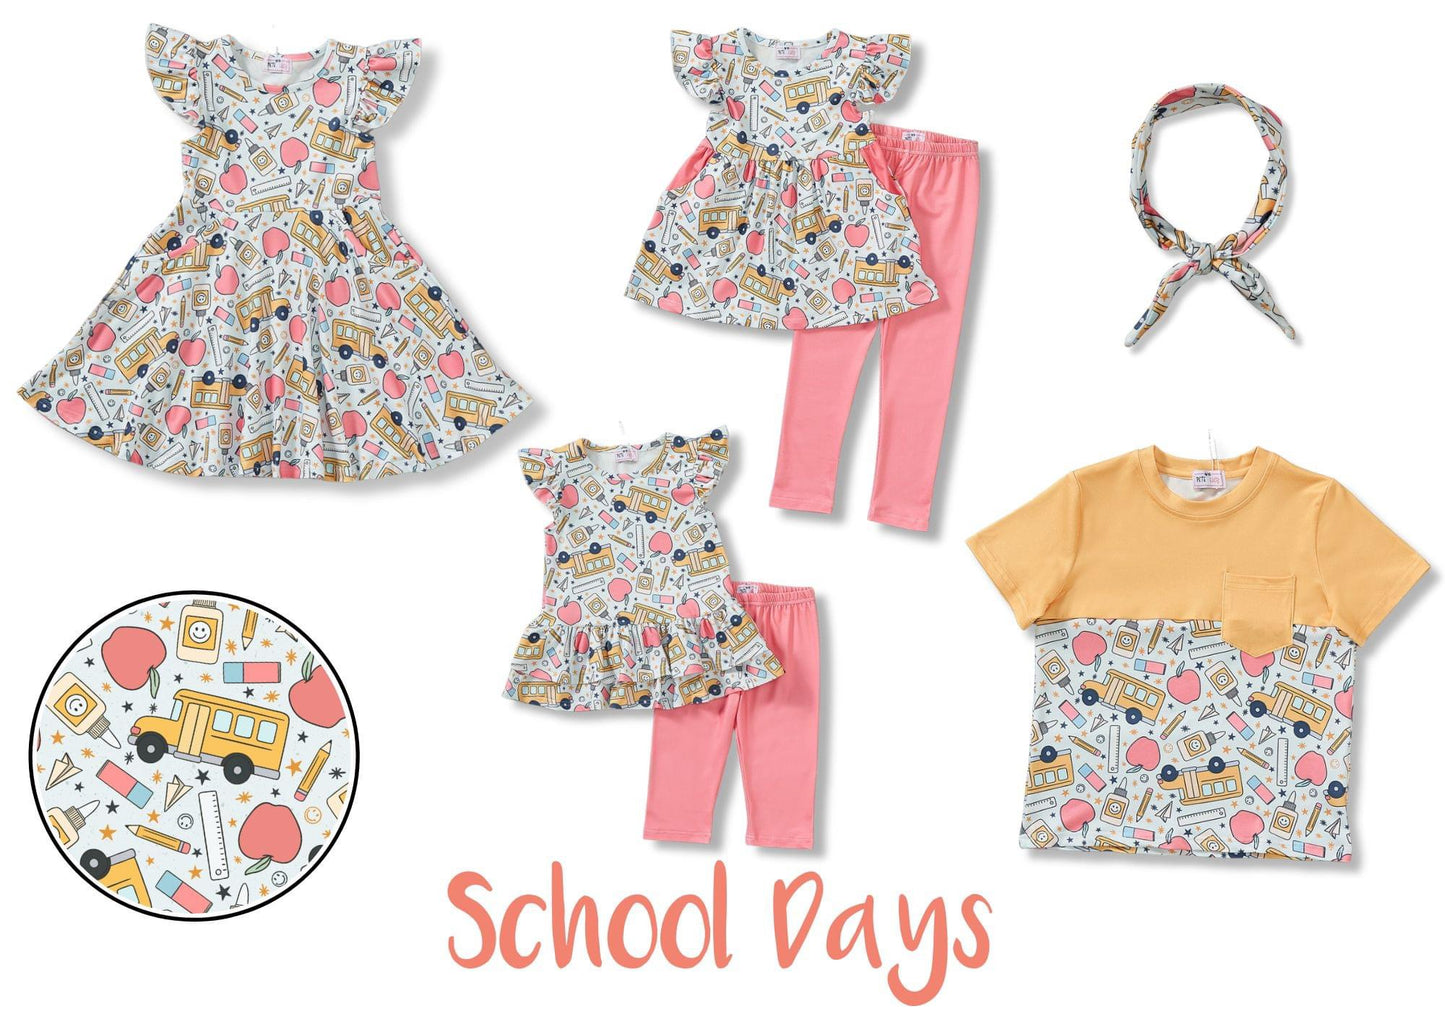 (Preorder) School Days Headband by Pete + Lucy